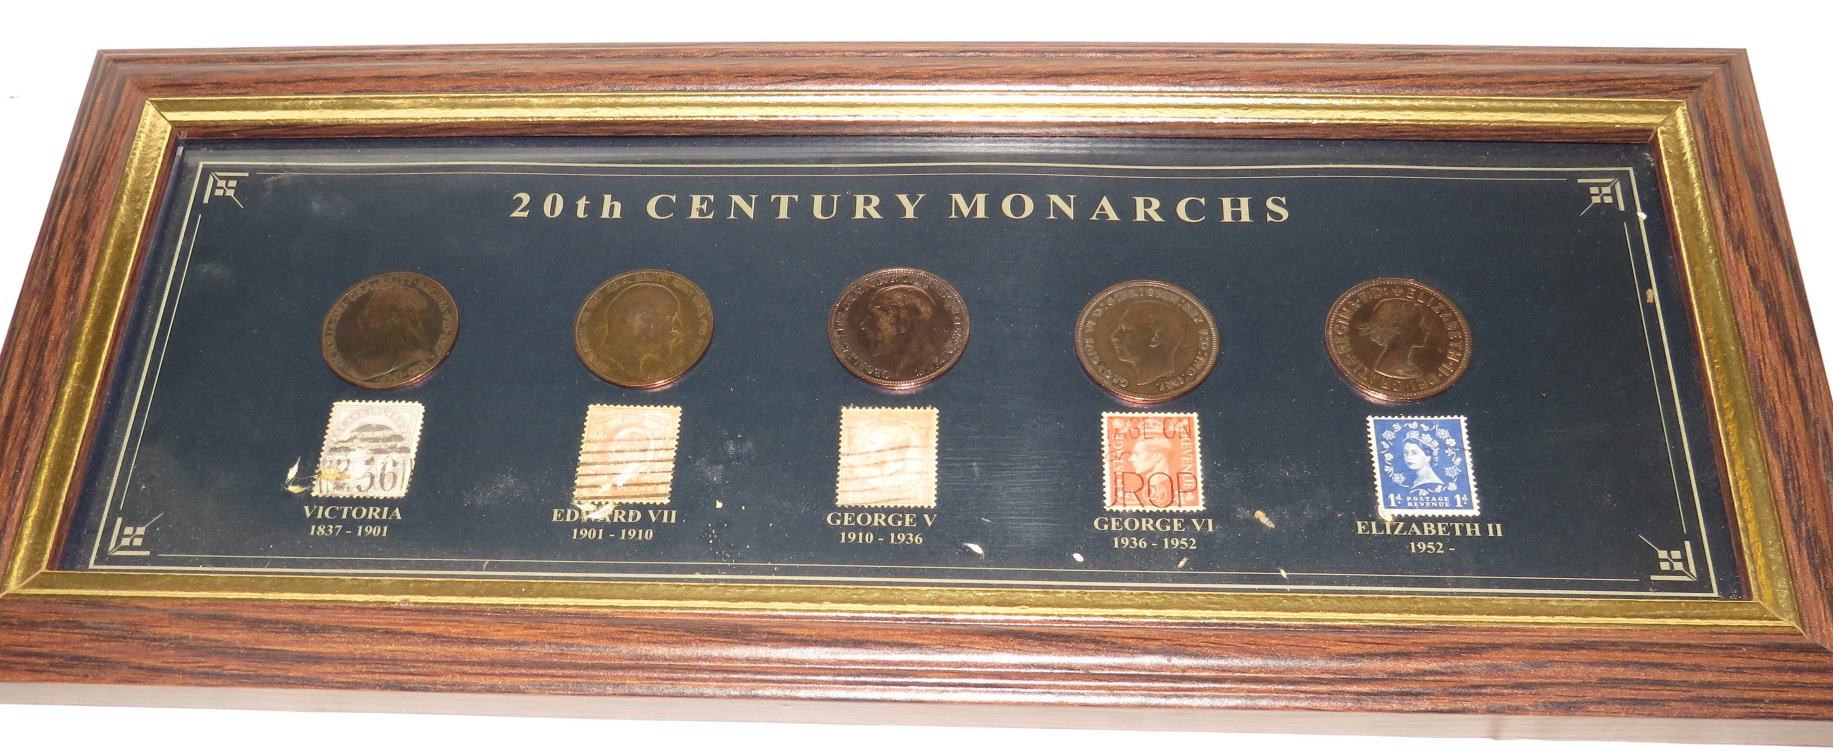 Framed set of five British coins and stamps titled '20th Century Monarchs' (11.5cm x 33.5cm)